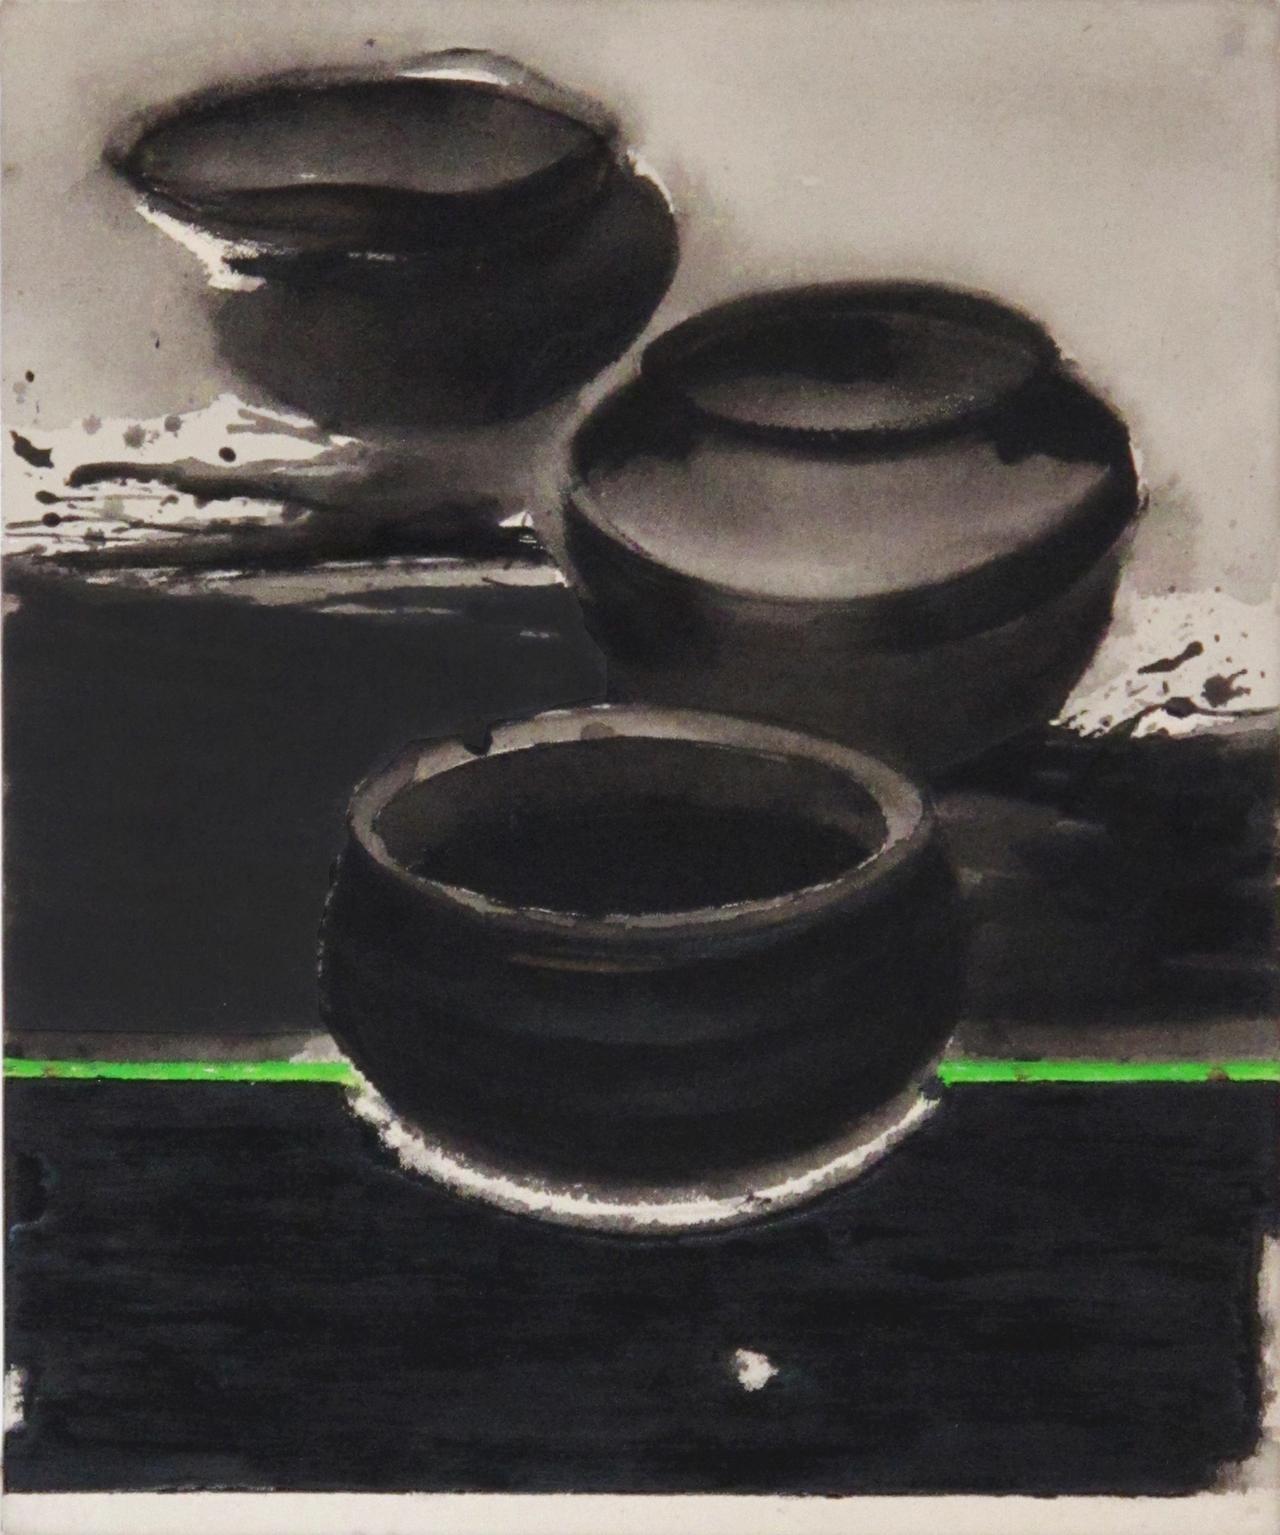 Pots, Contain Universe Acrylic Pigment on Canvas, Black, Green, Grey "In Stock"